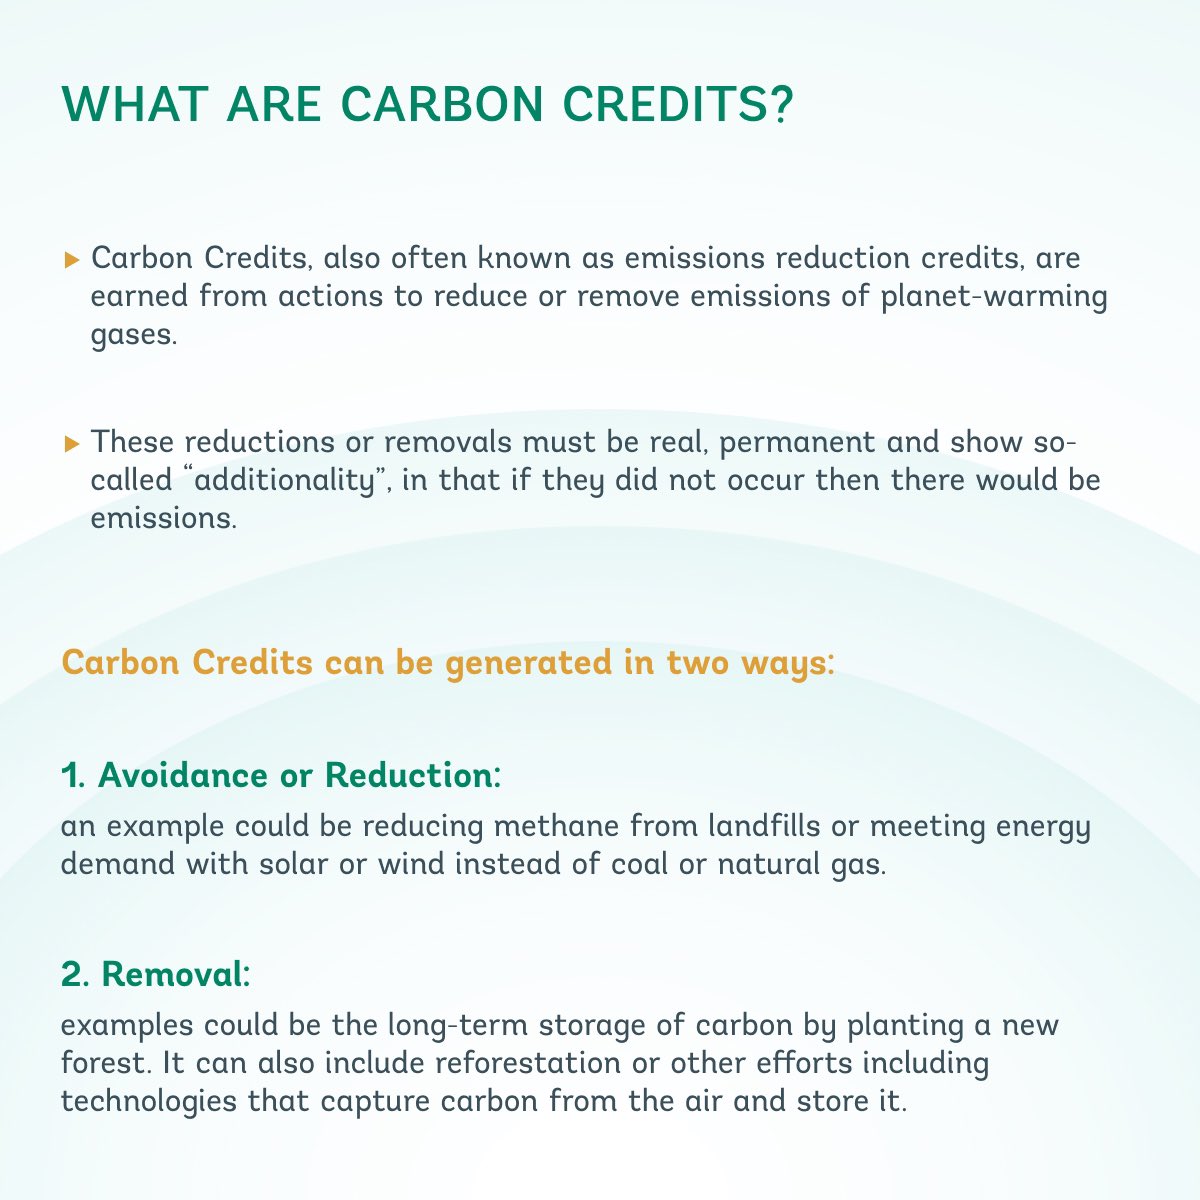 What are Internationally Transferred Mitigation Outcomes(ITMOs) or Carbon Credits?